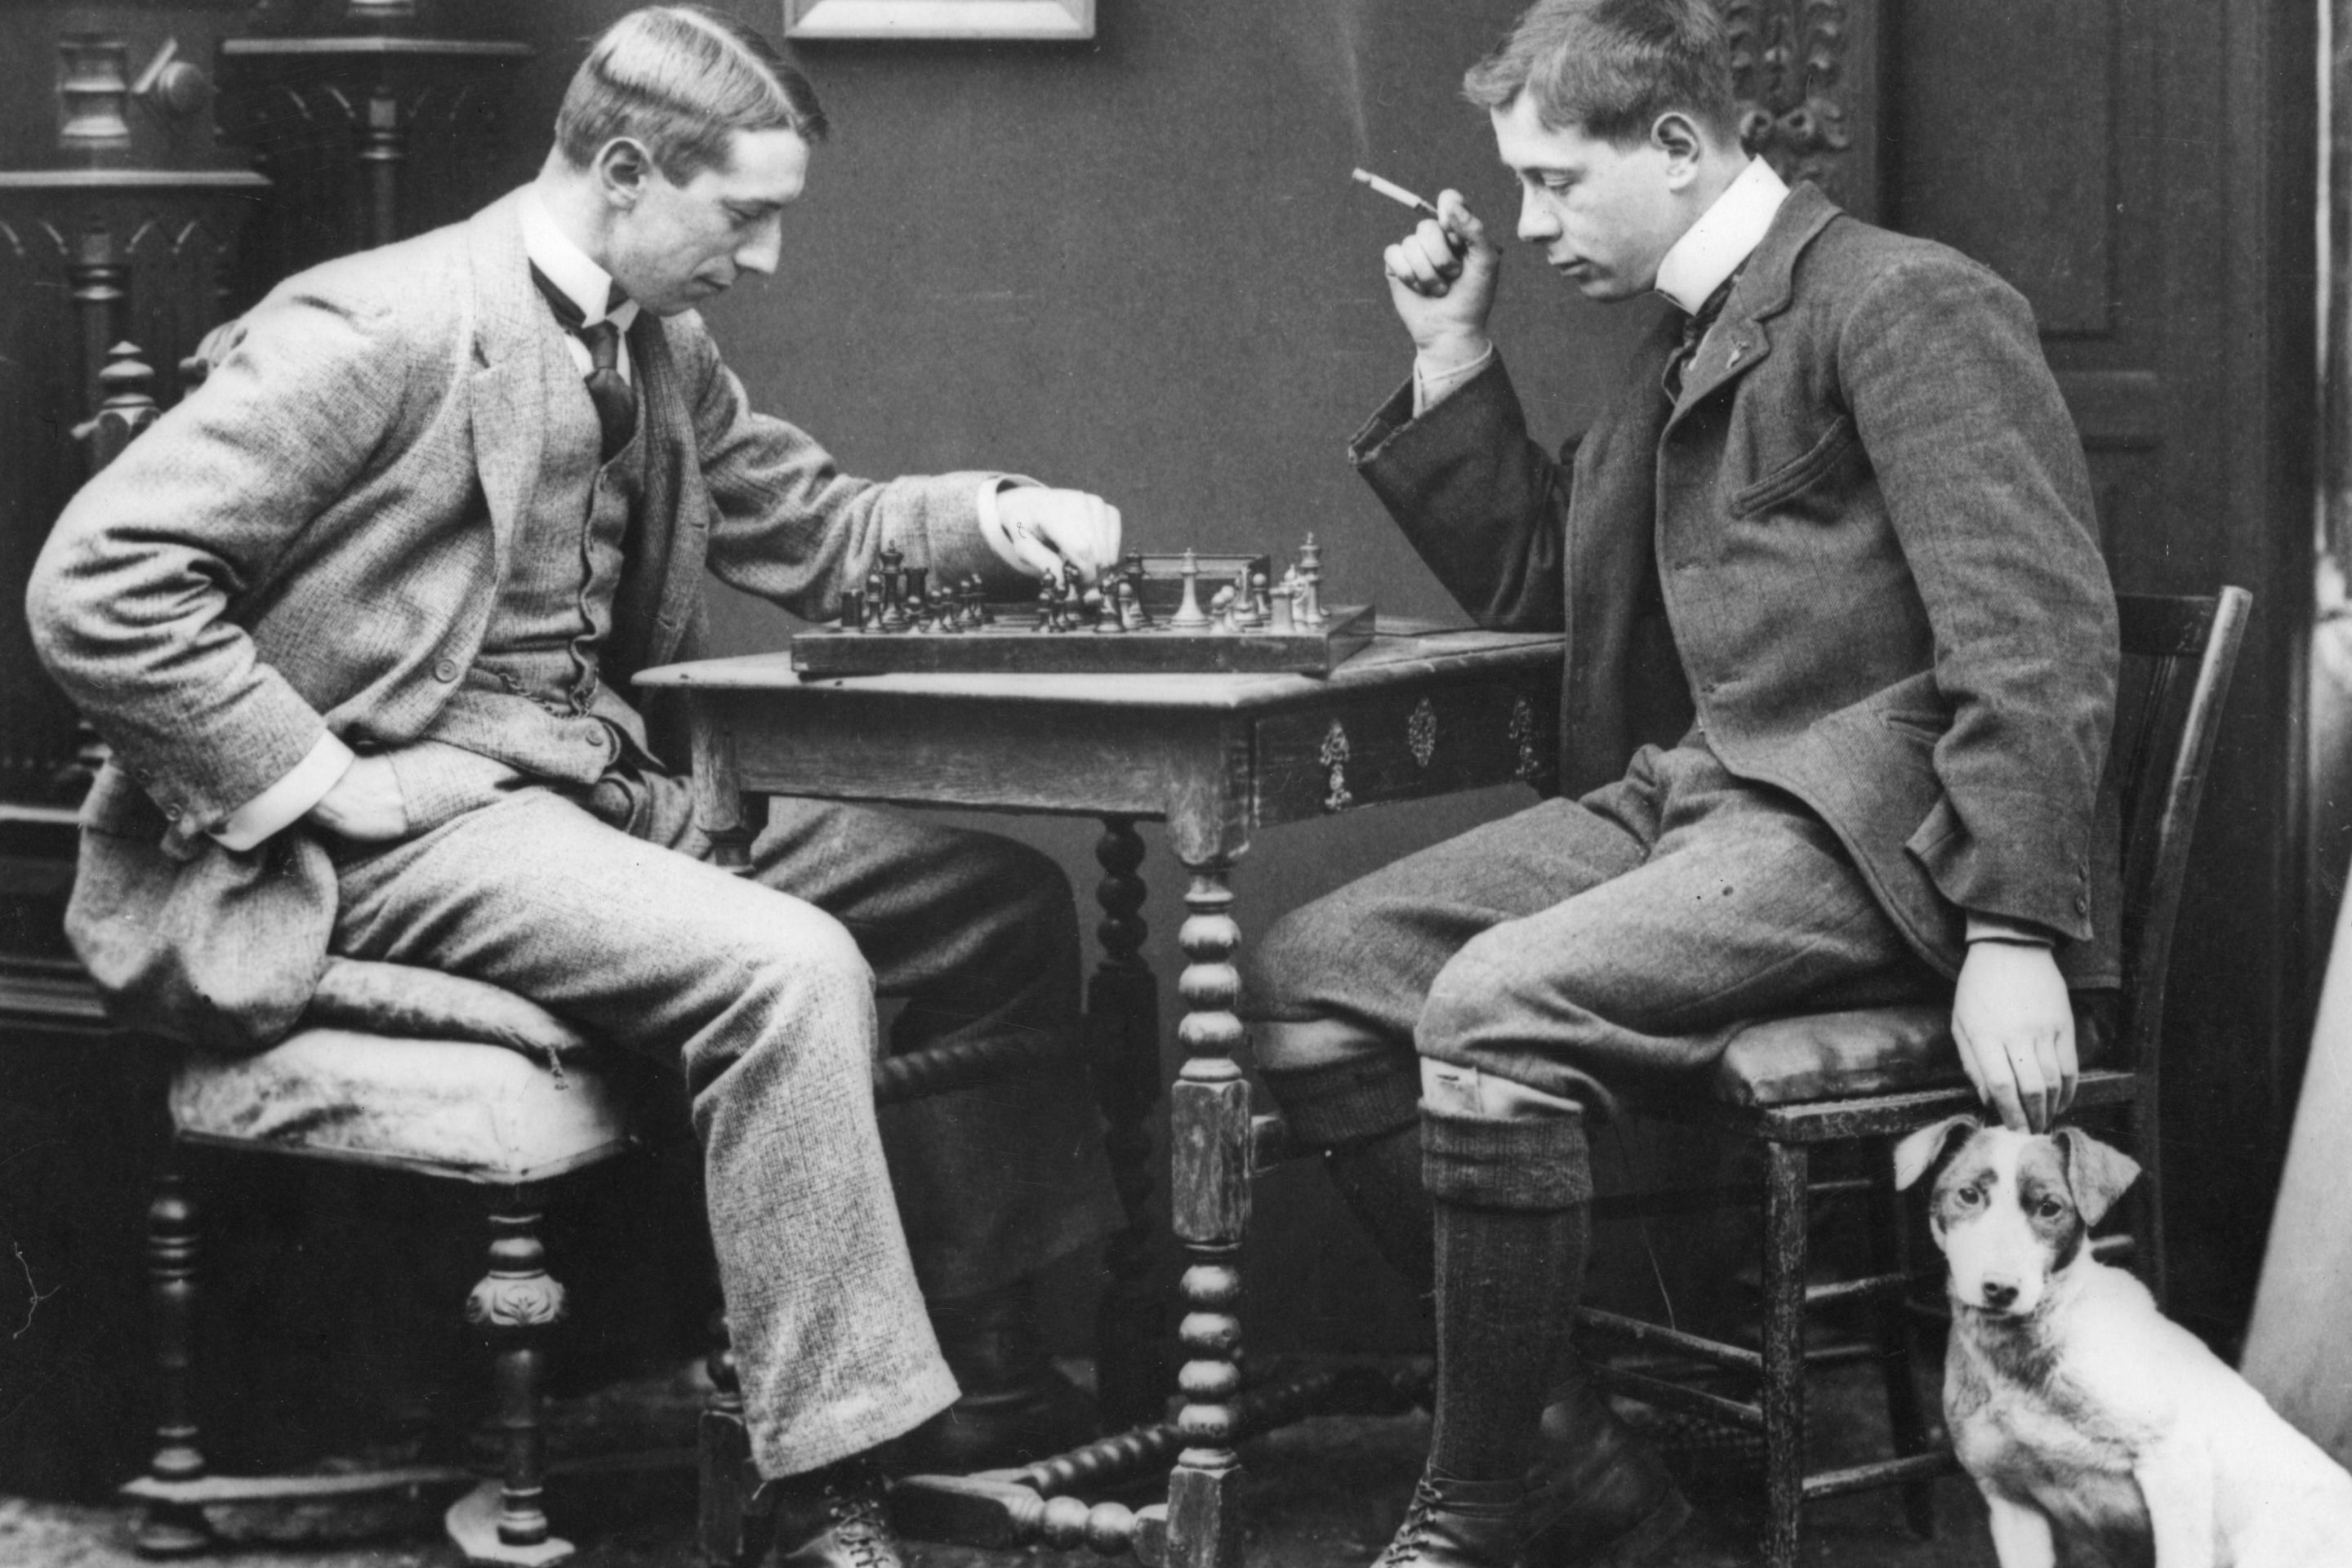 circa 1885: A couple of men playing a leisurely game of chess. The photo is in black in white. The men are dressed in suits. One of them is also petting a dog.